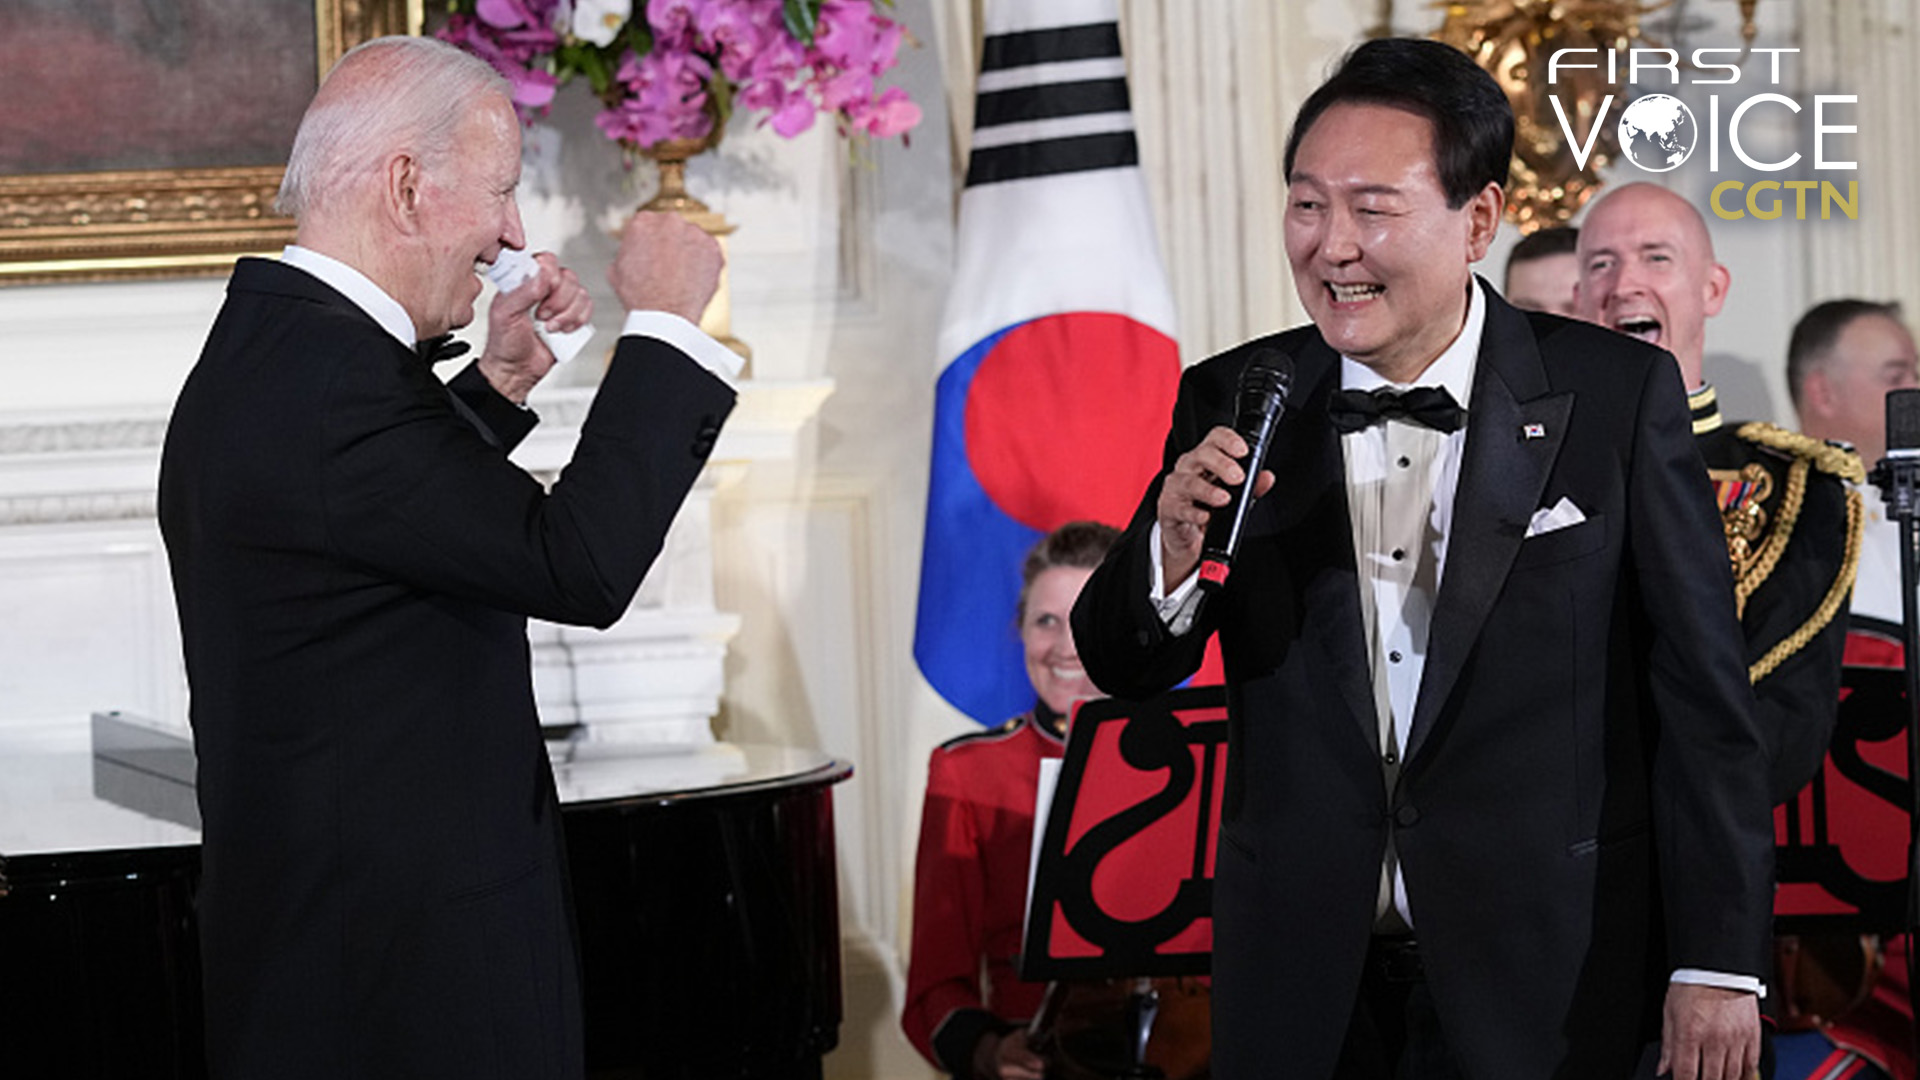 U.S. President Joe Biden reacts as South Korean President Yoon Suk-yeol sings in the State Dining Room of the White House in Washington, D.C., April 26, 2023. /CFP